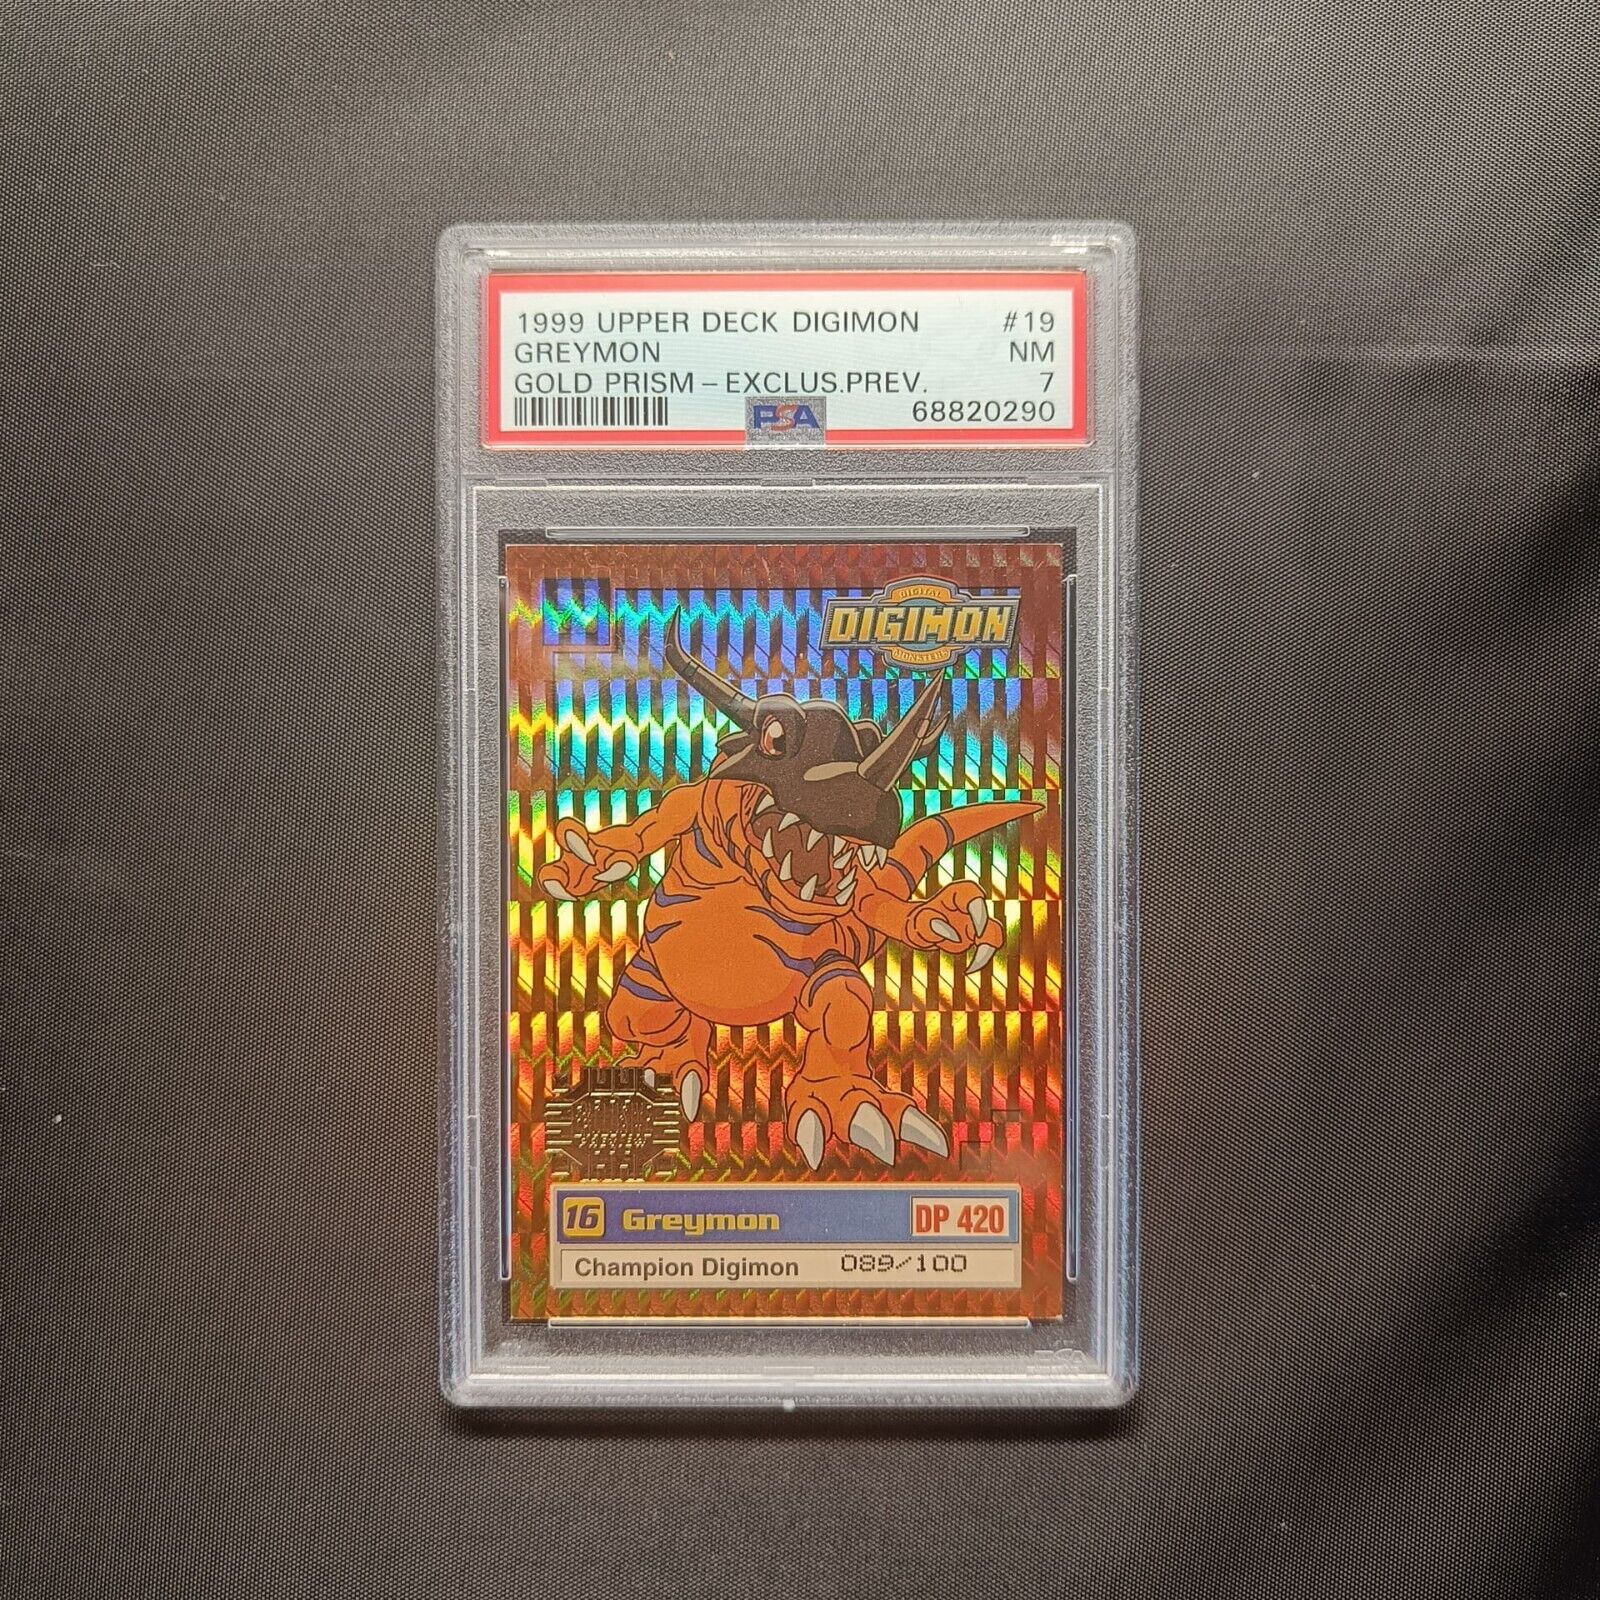 Greymon Gold Prism Exclusive Preview numbered 089/100, Unique item